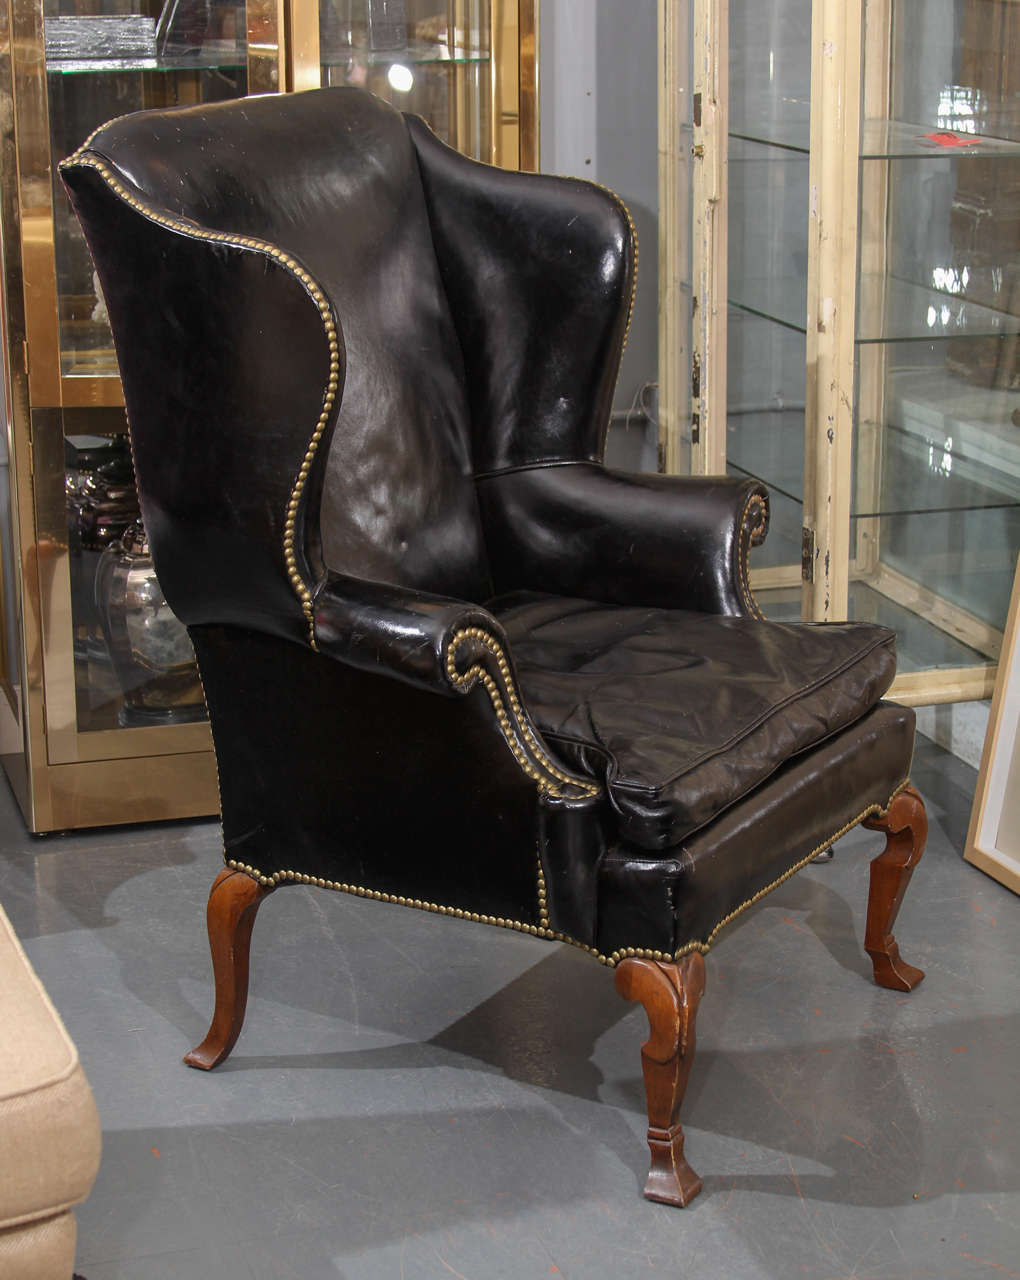 Oversized, great lines. Leather with nailhead trim.